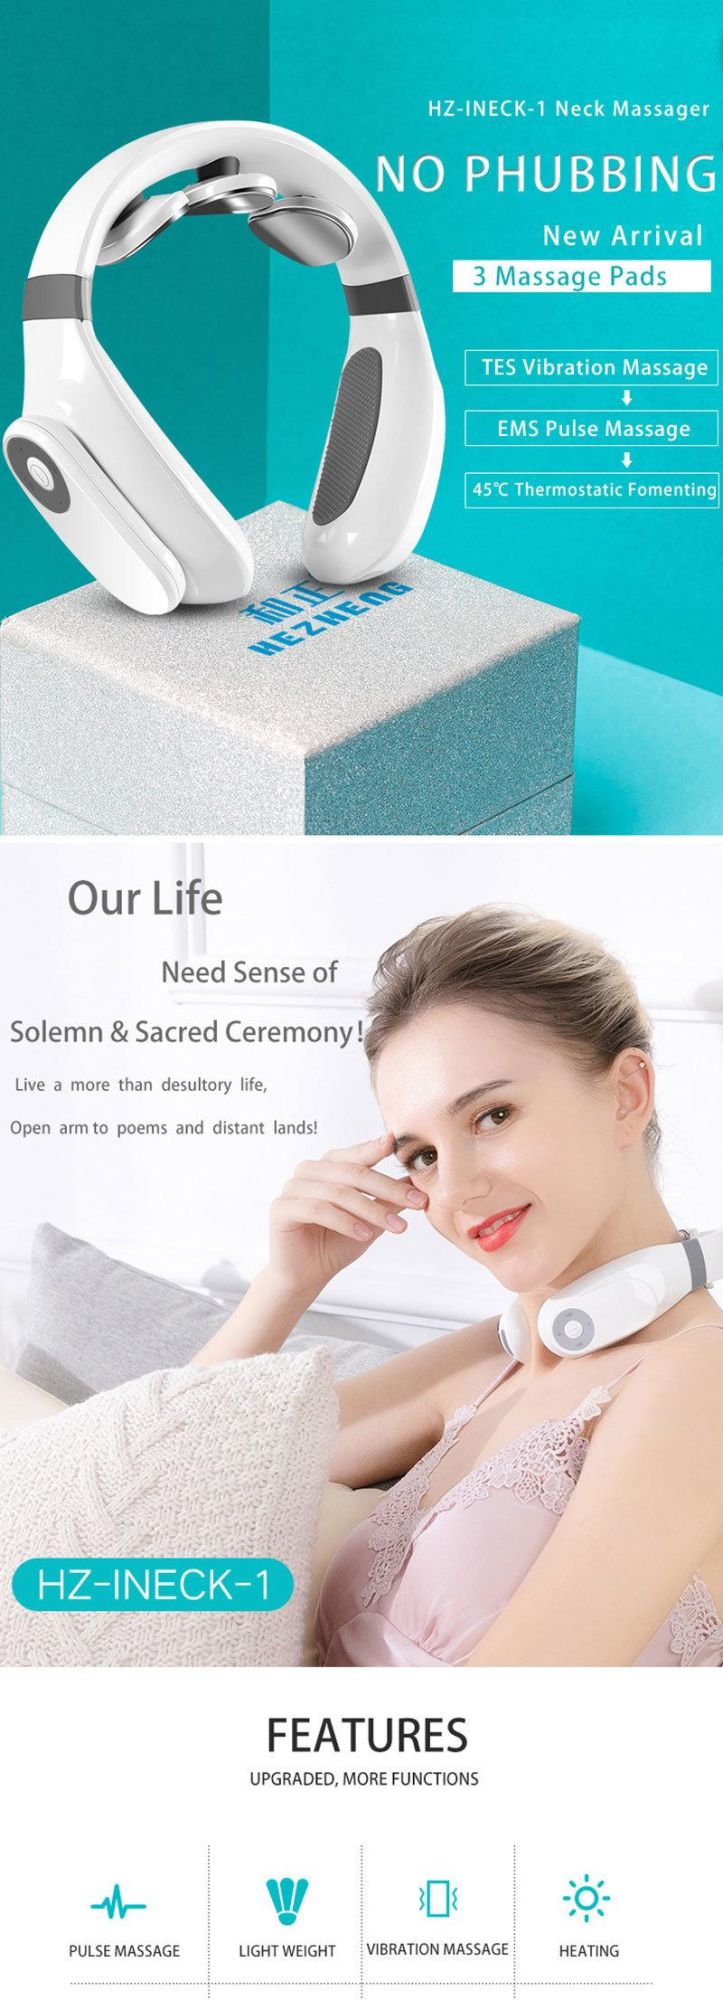 Hezheng Wireless Remote Control Touch Screen Electric EMS Pulse Pain Heat Therapy Massage Product Cervical Care Neck Massager with Vibration Machine